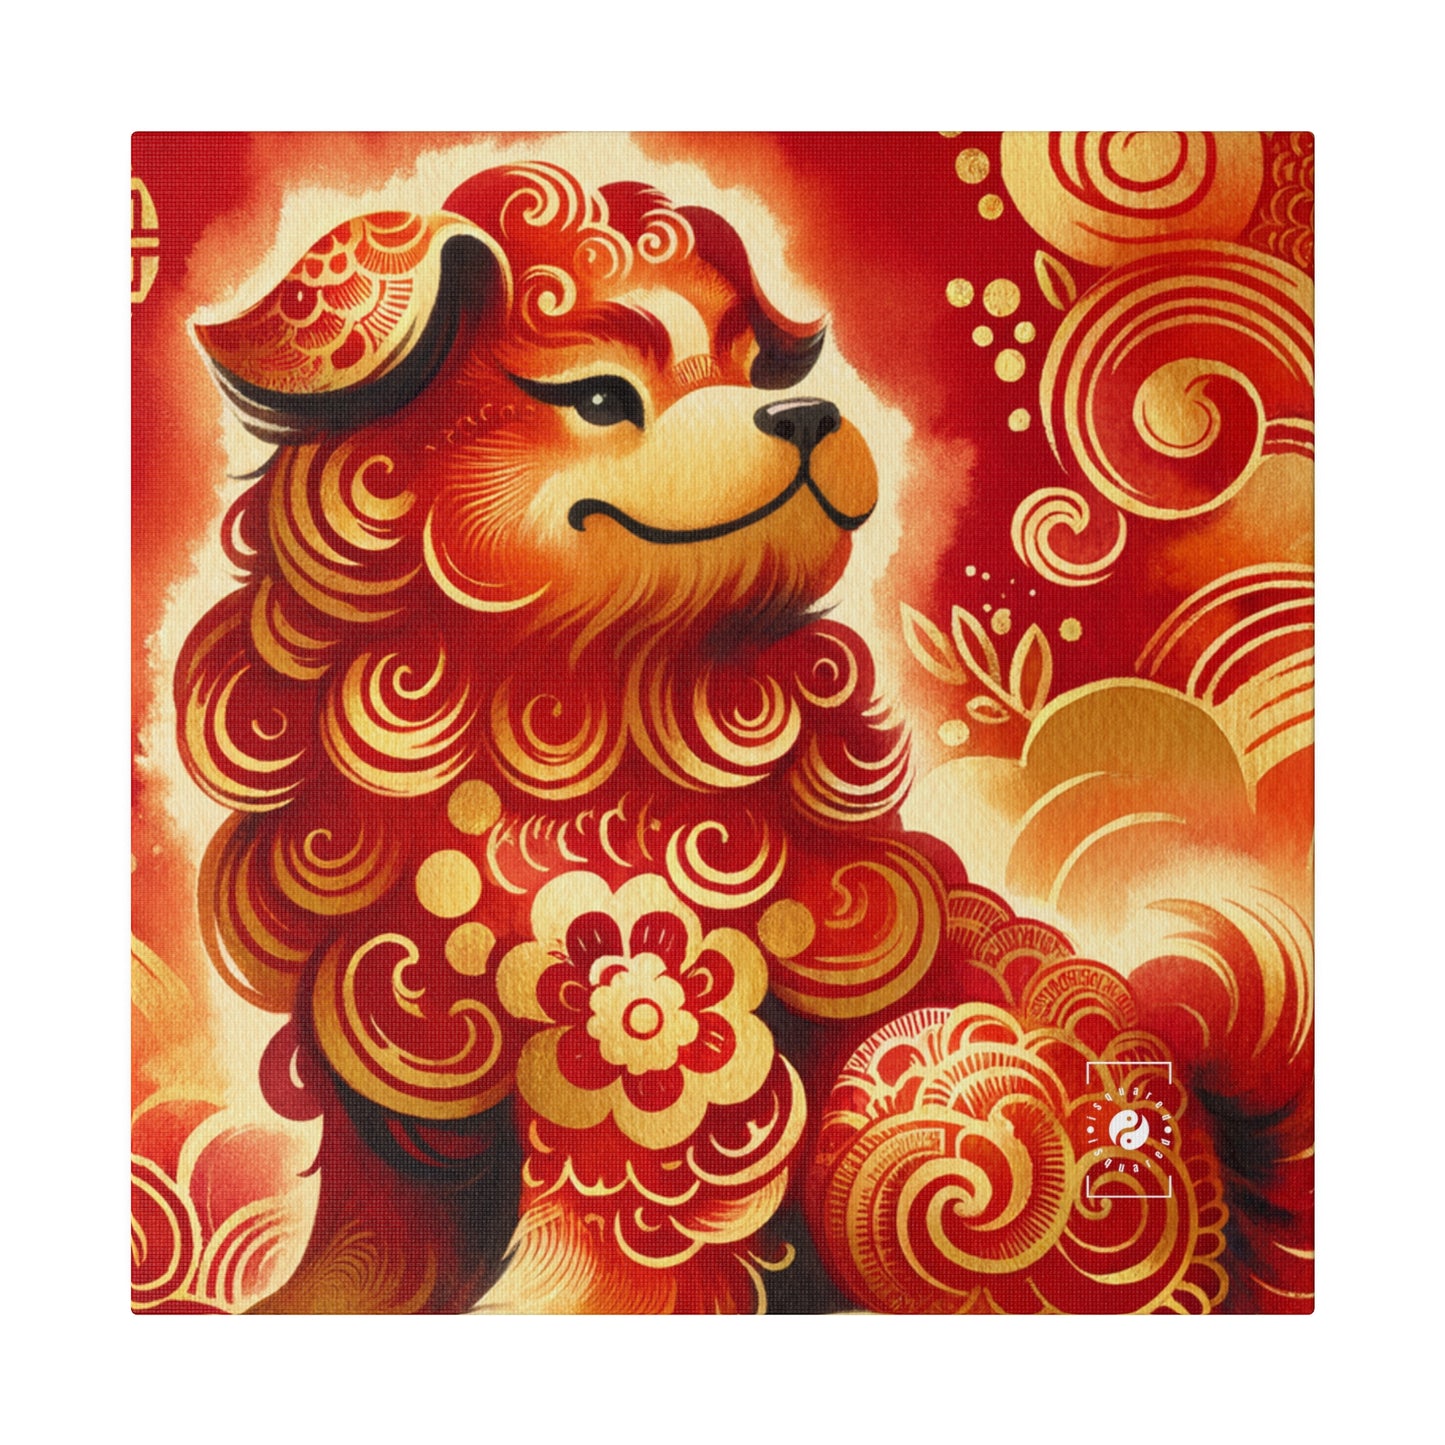 "Golden Canine Emissary on Crimson Tide: A Chinese New Year Odyssey" - Art Print Canvas